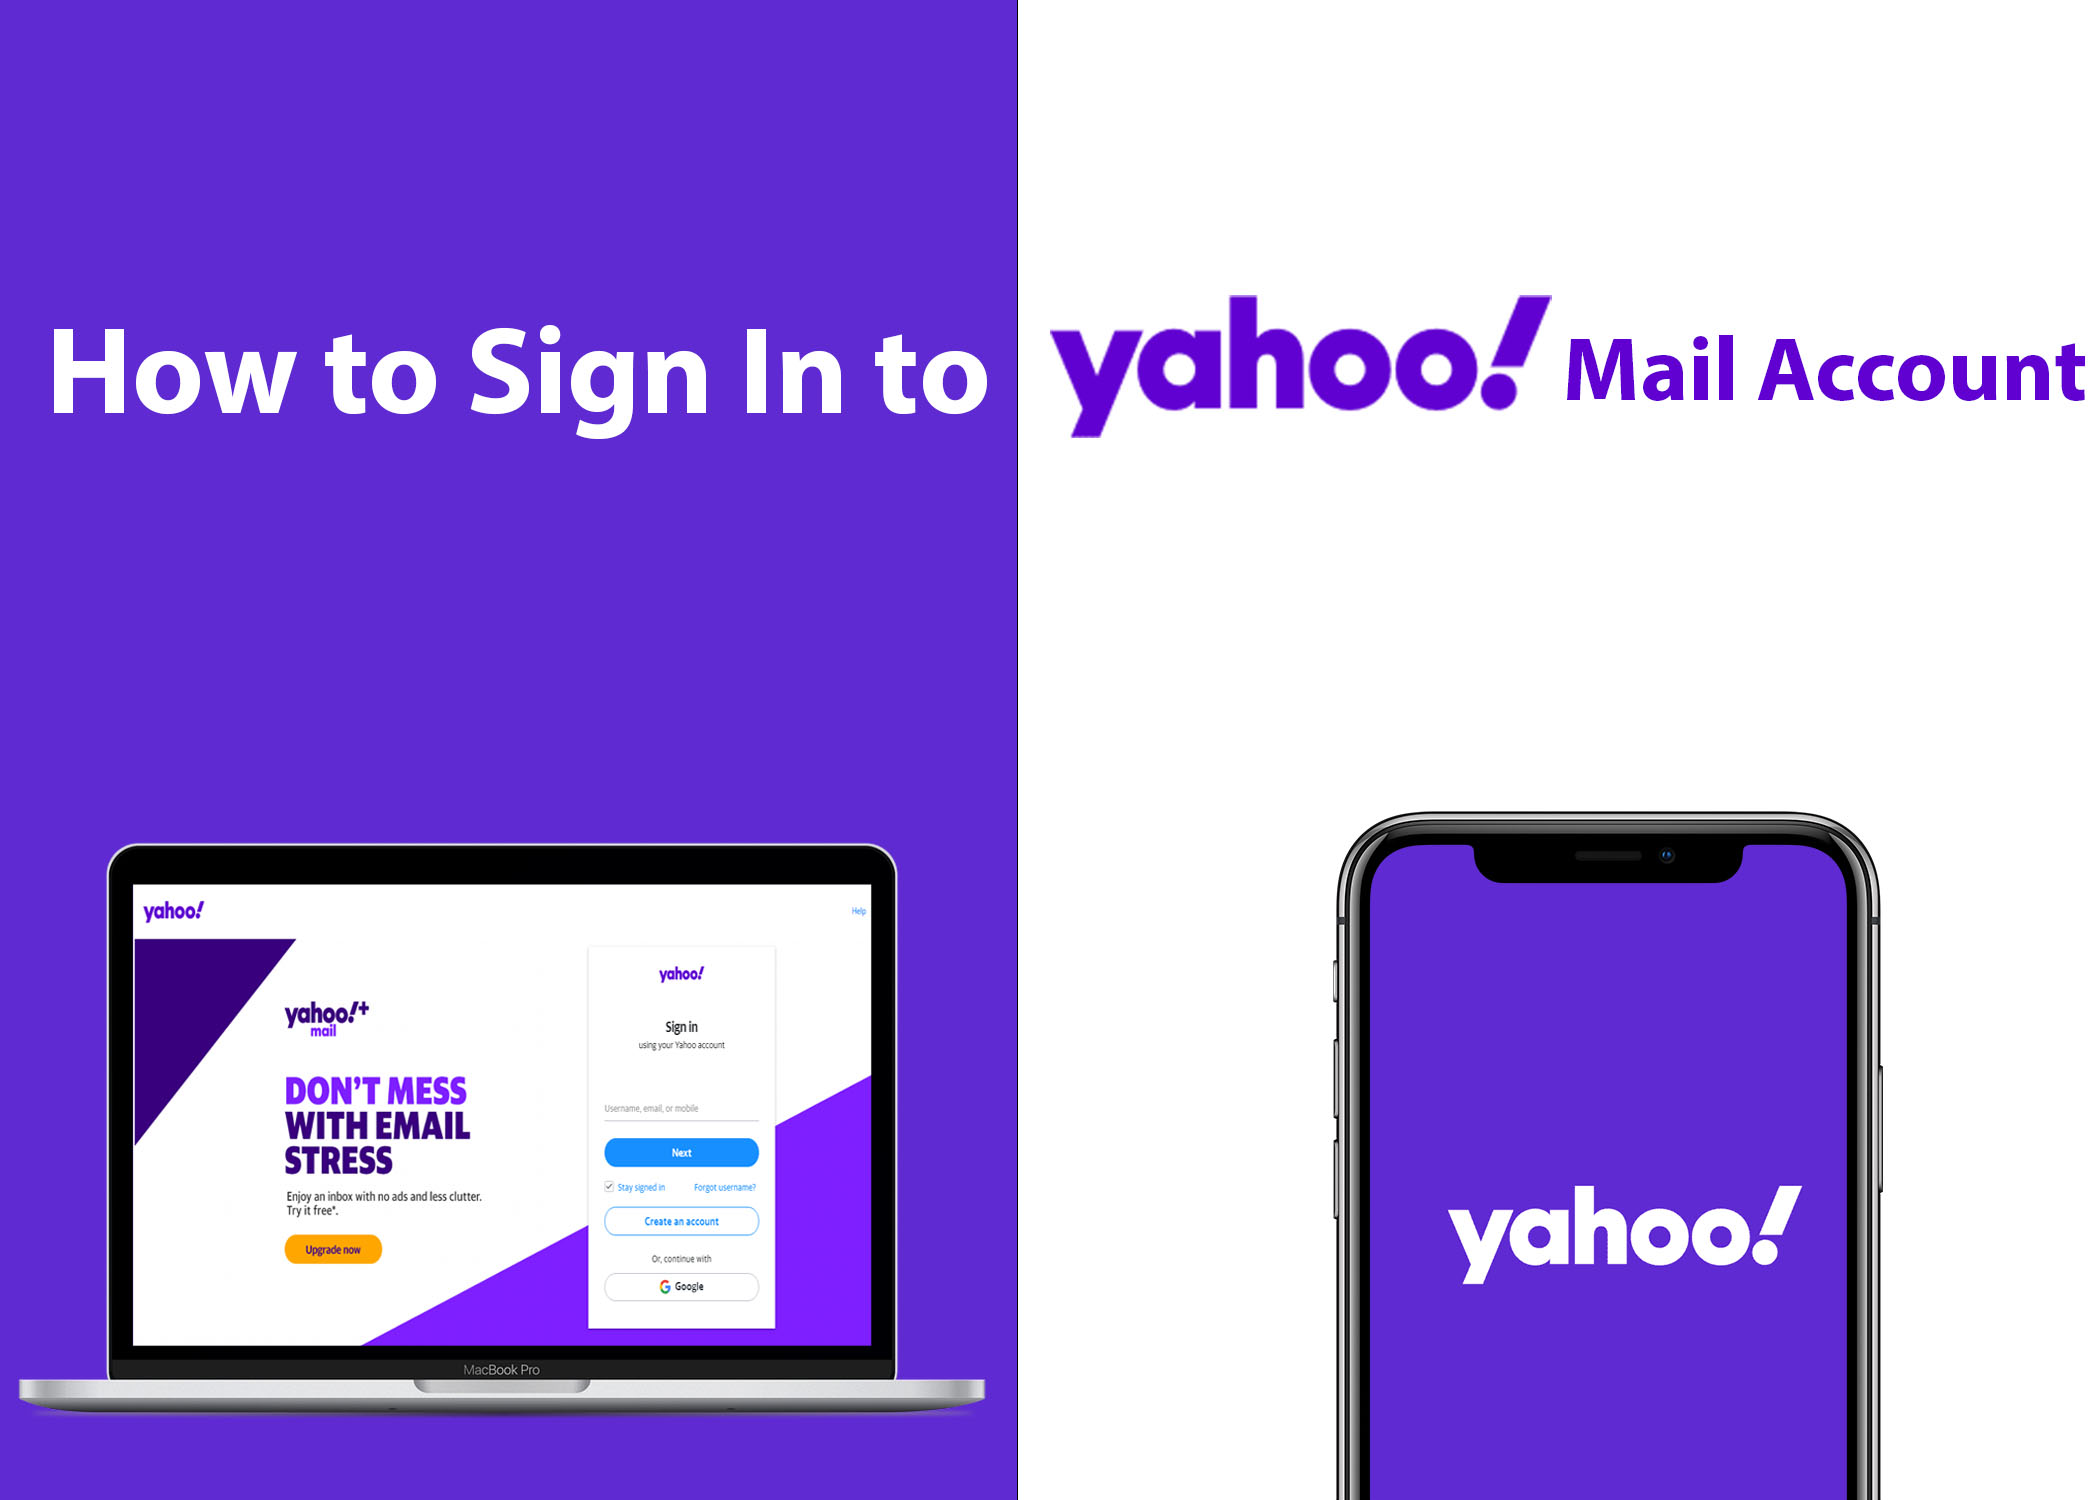 Yahoo Mail Login - How to Sign In to Yahoo Mail Account